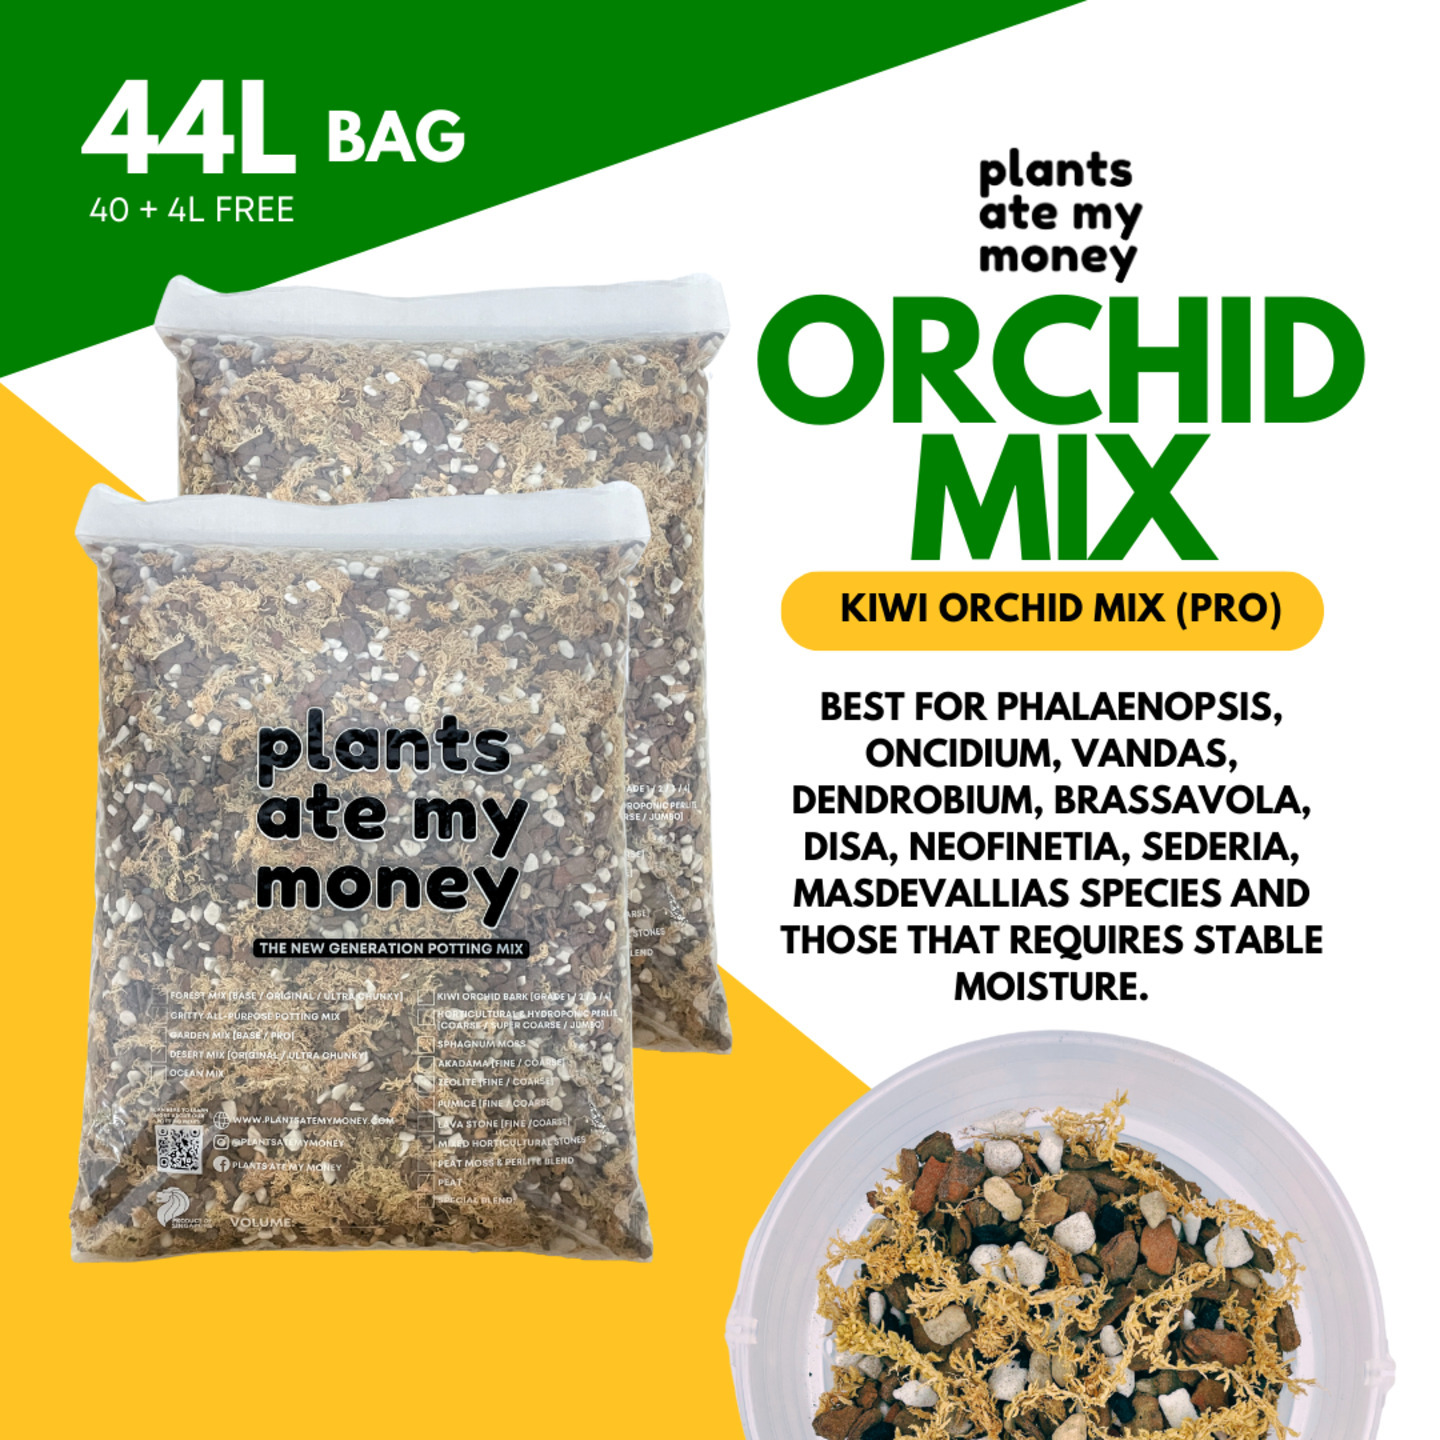 Kiwi Orchid Mix - Pro [44L] - Premium Potting Mix made for Orchids, Cattleyas and Phalaenopsis